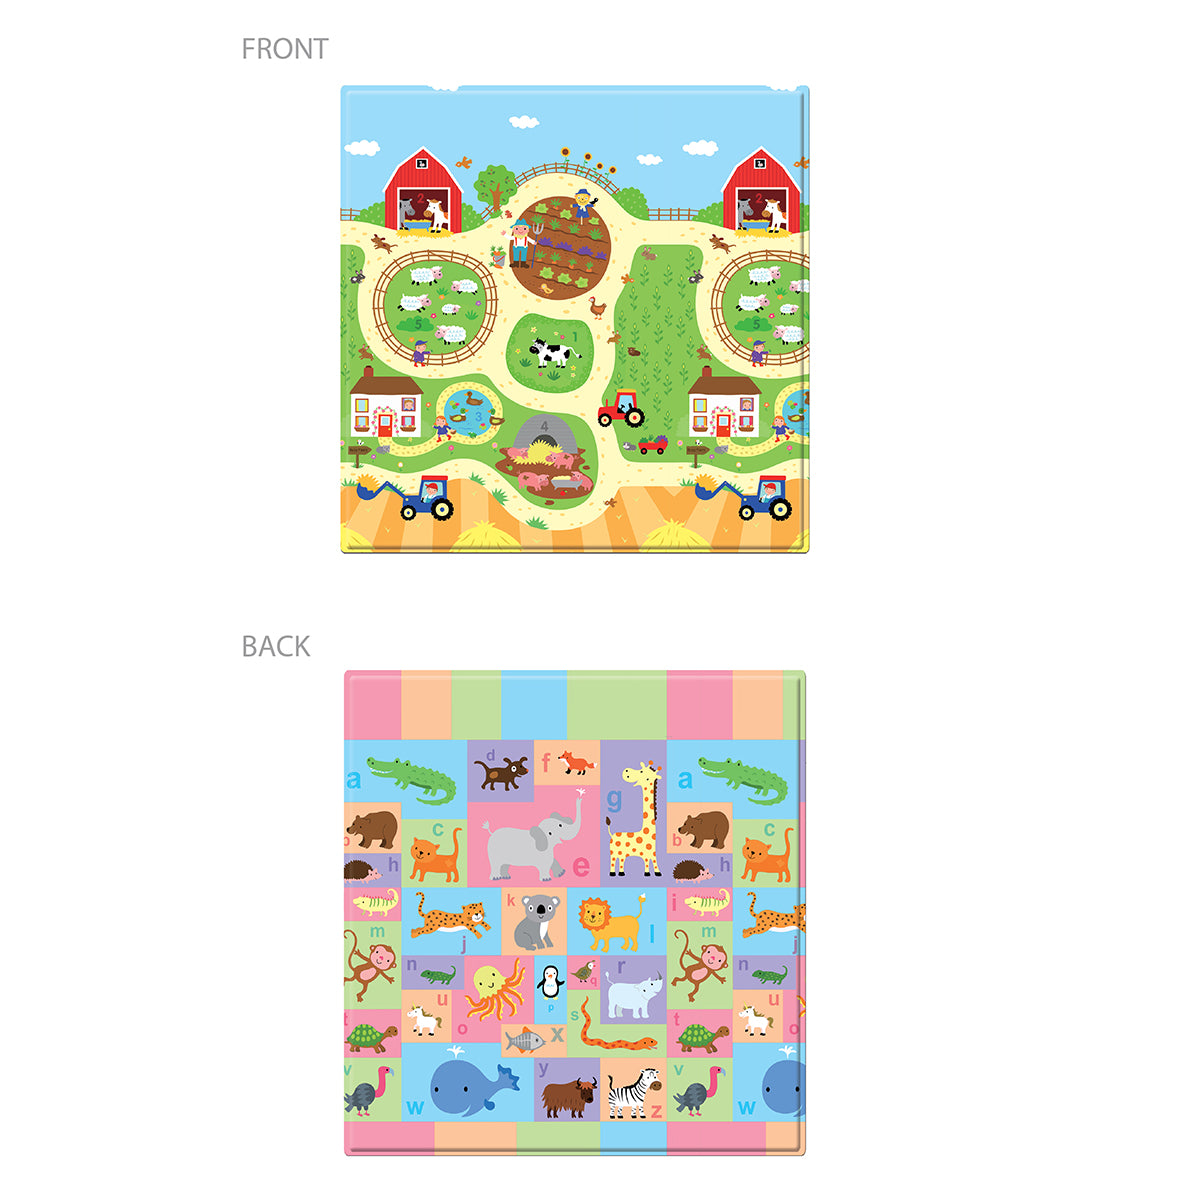 Busy Farm Babycare Reversible Playmat - Small